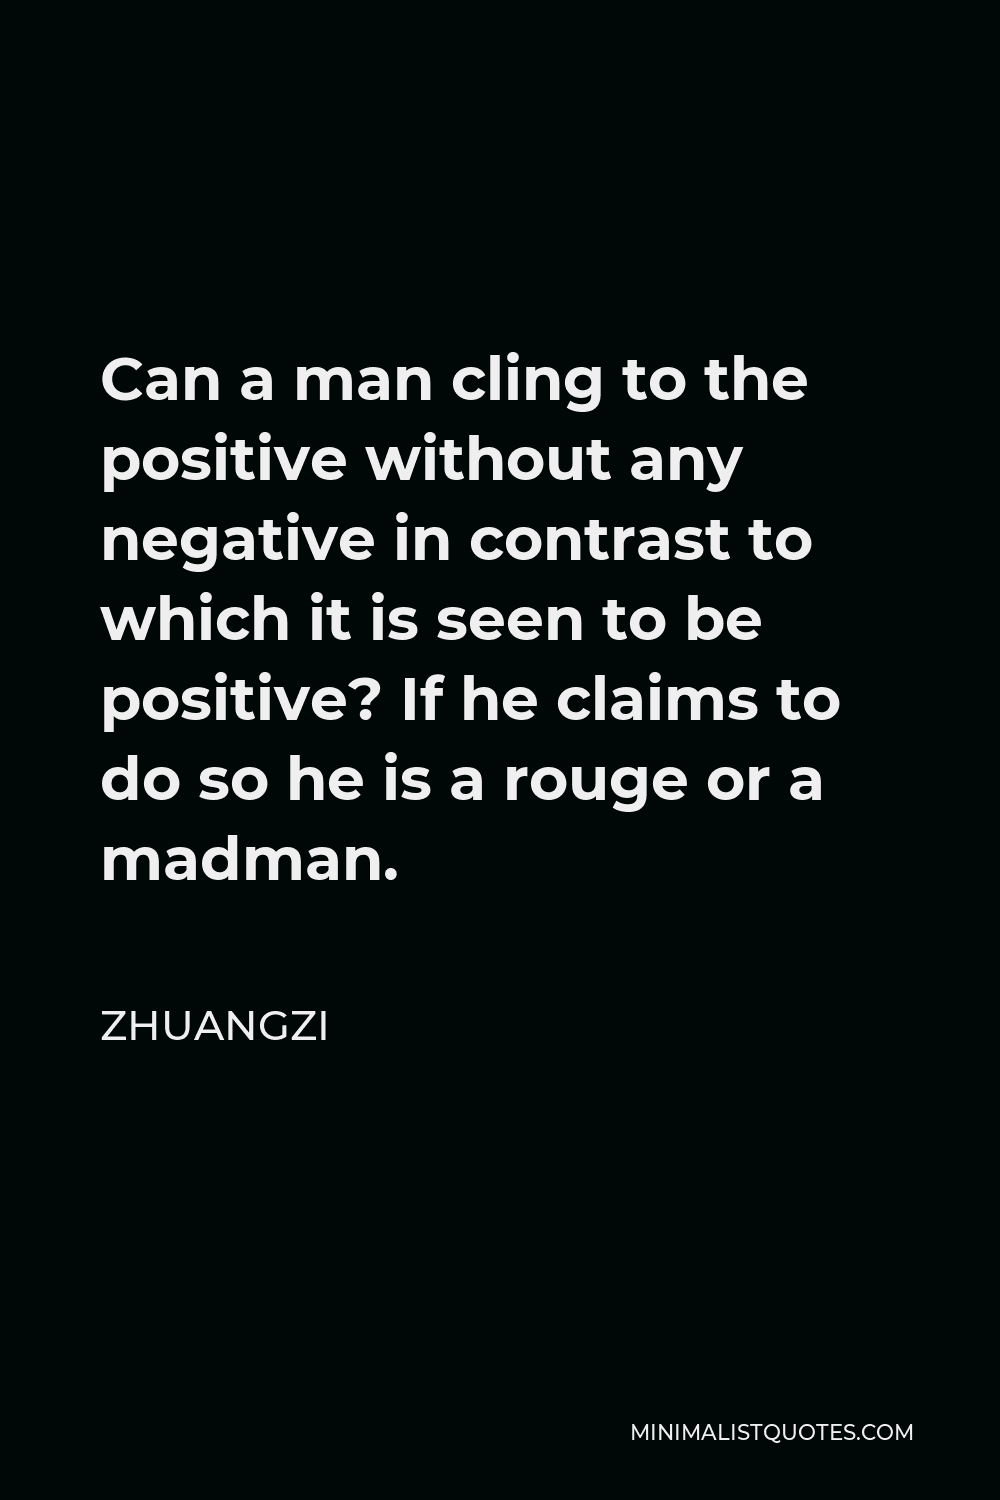 Zhuangzi Quote - Can a man cling to the positive without any negative in contrast to which it is seen to be positive? If he claims to do so he is a rouge or a madman.